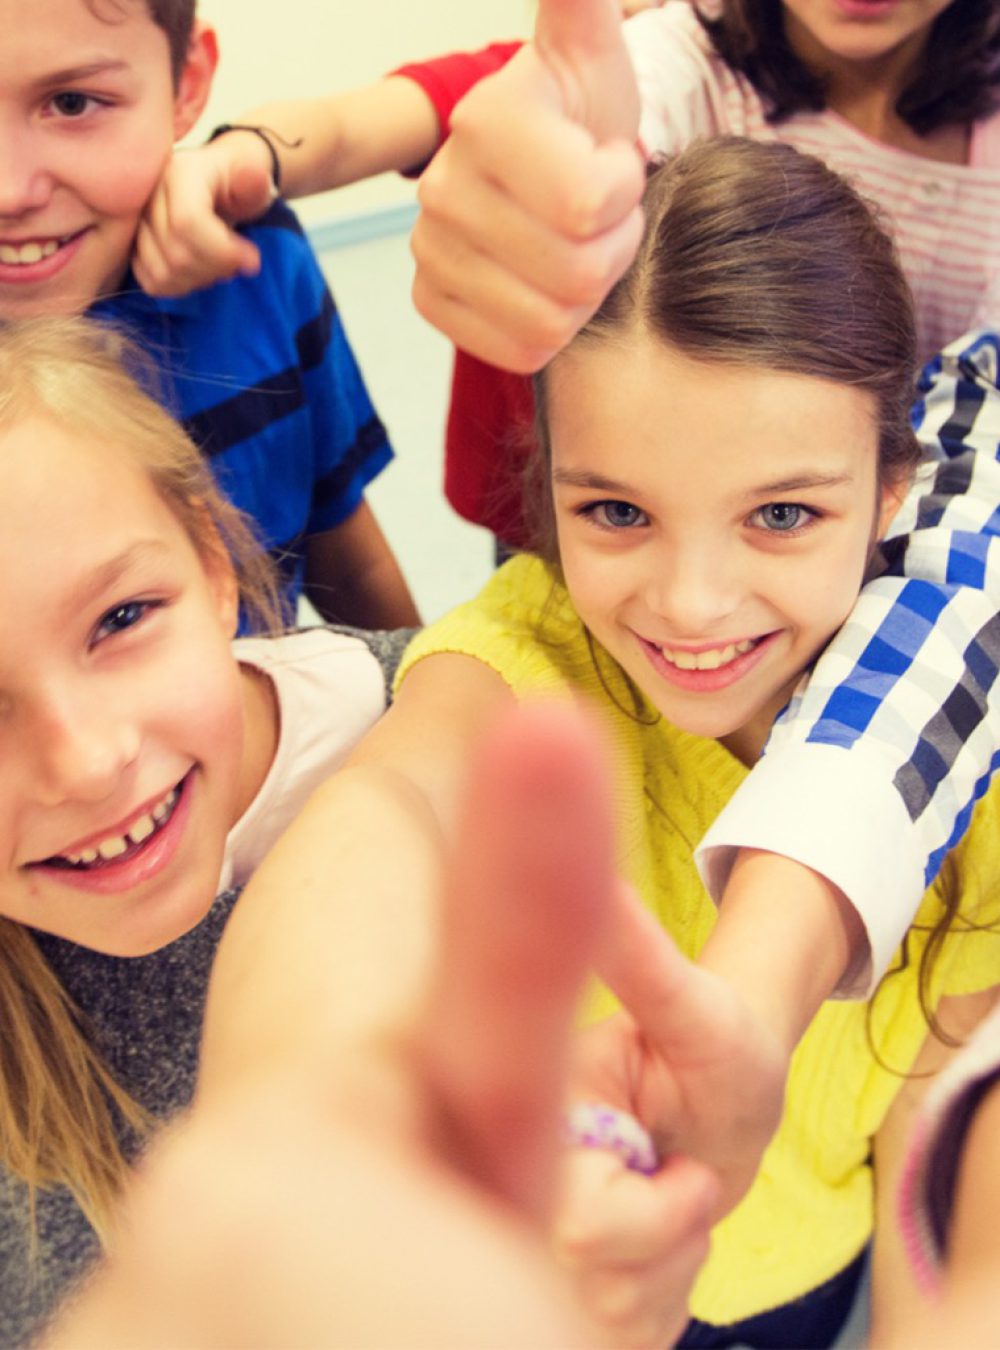 group-of-school-kids-showing-thumbs-up-picture-id487786982